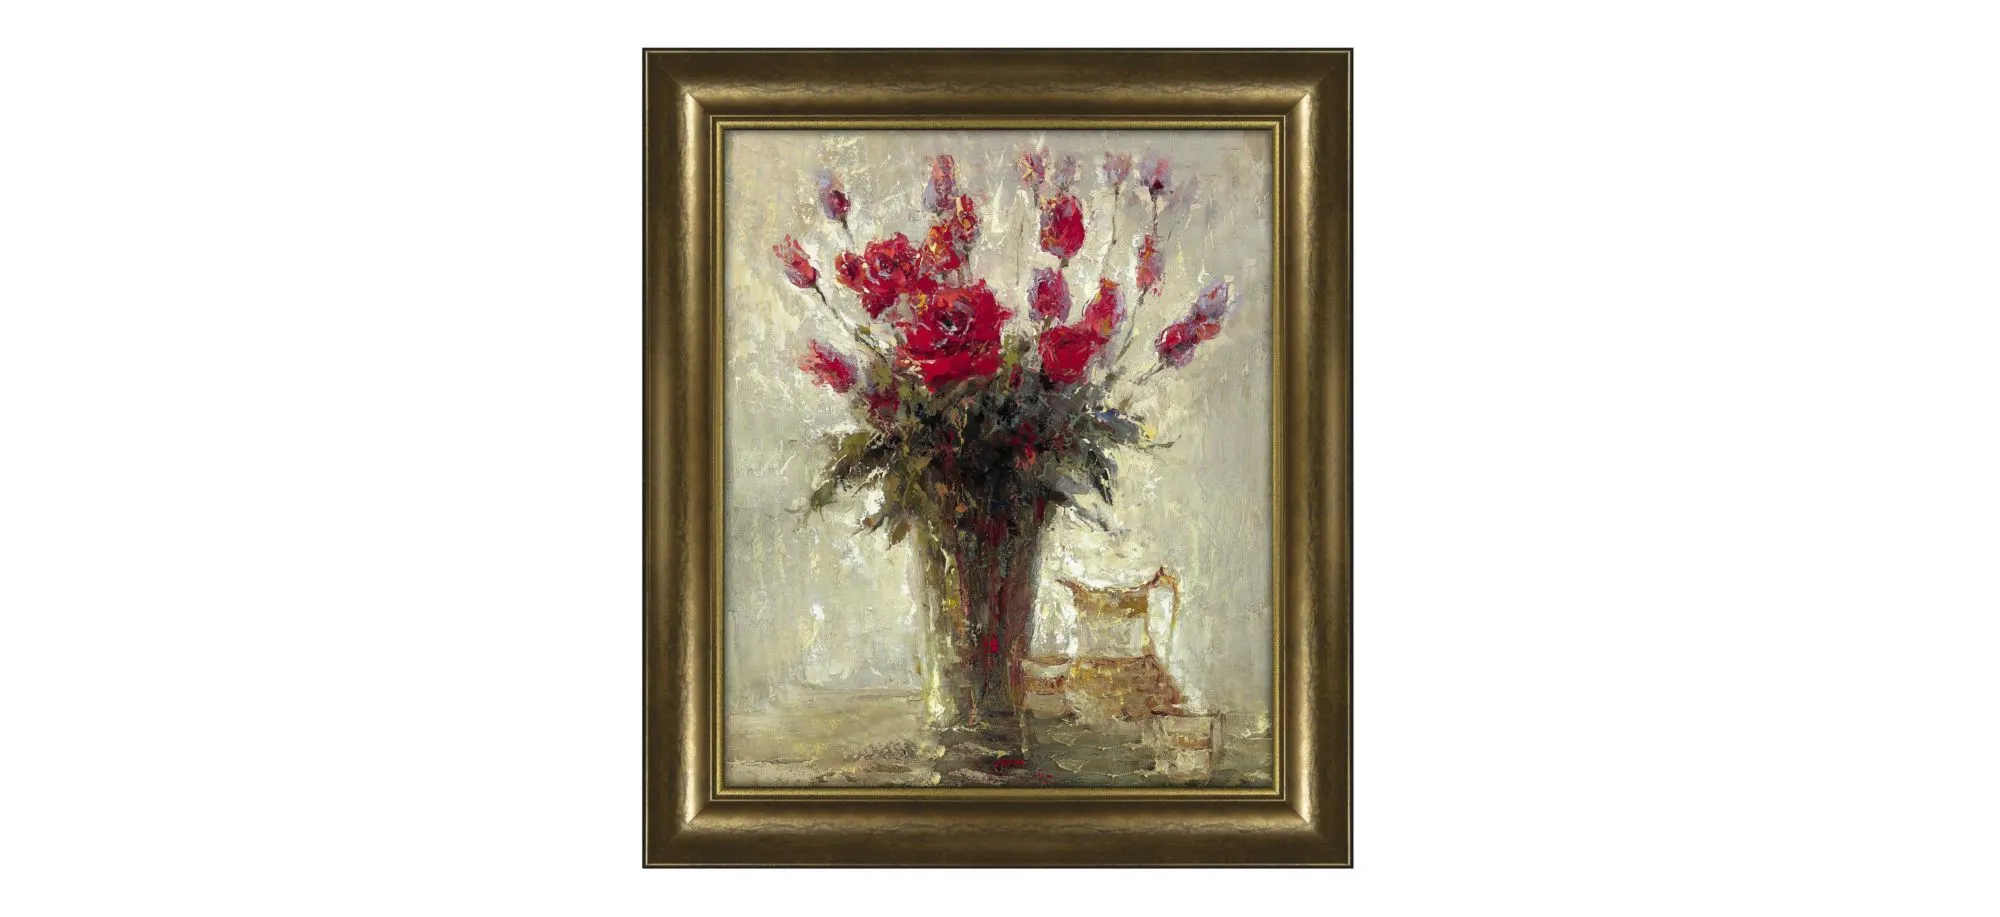 Vase With Milk Pitcher Framed Canvas Wall Art in Multicolor by Prestige Arts /Ati Indust